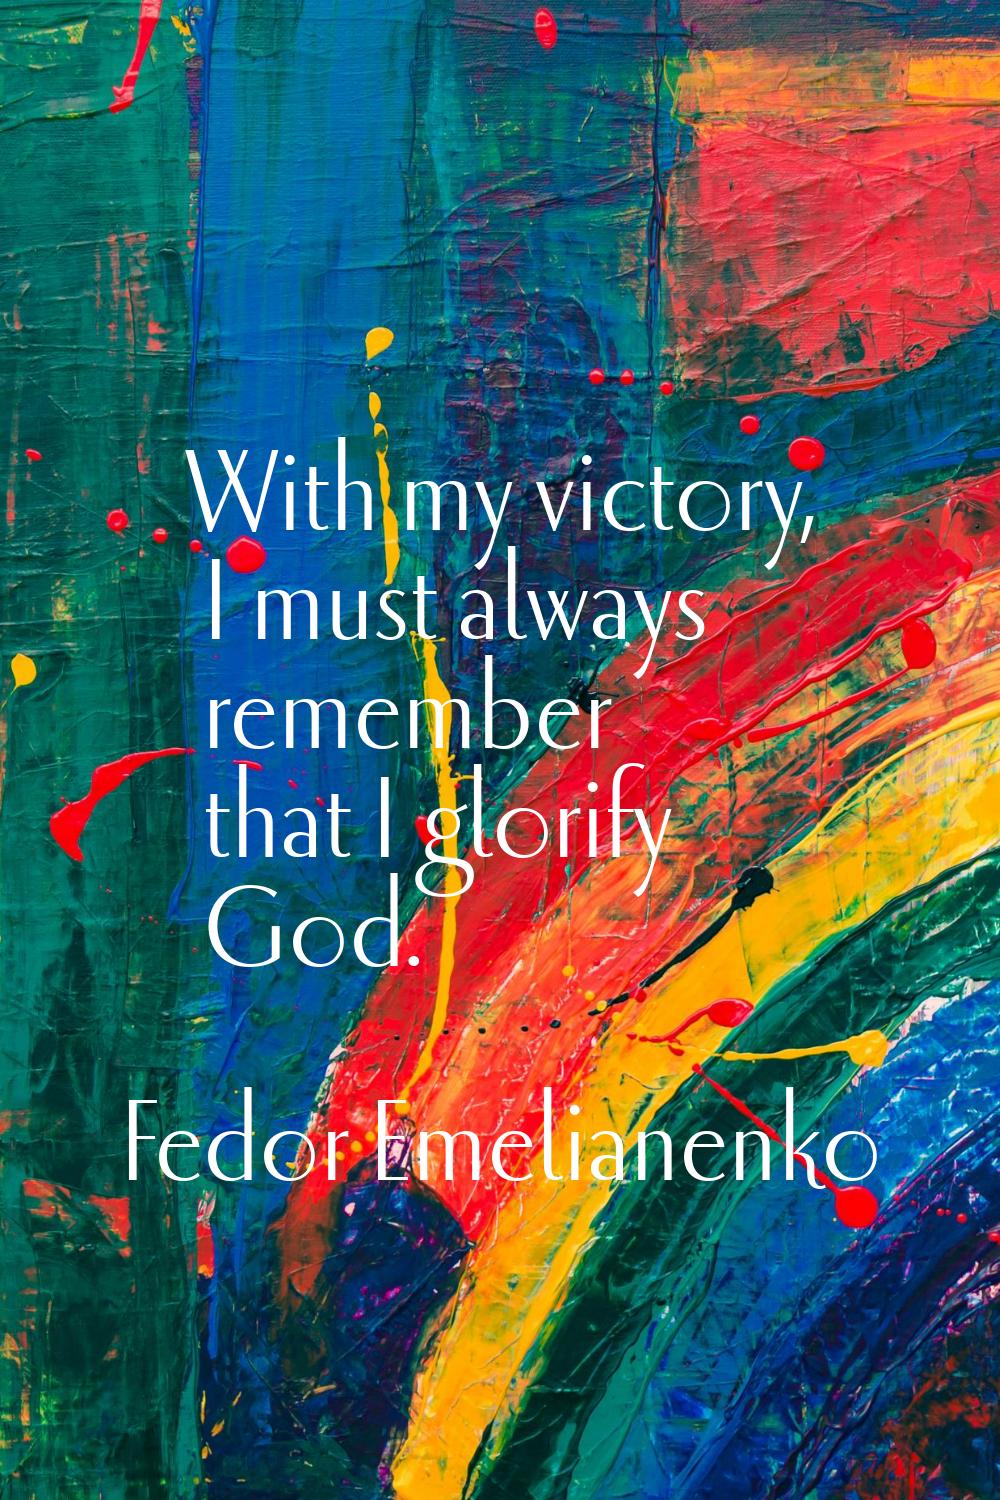 With my victory, I must always remember that I glorify God.